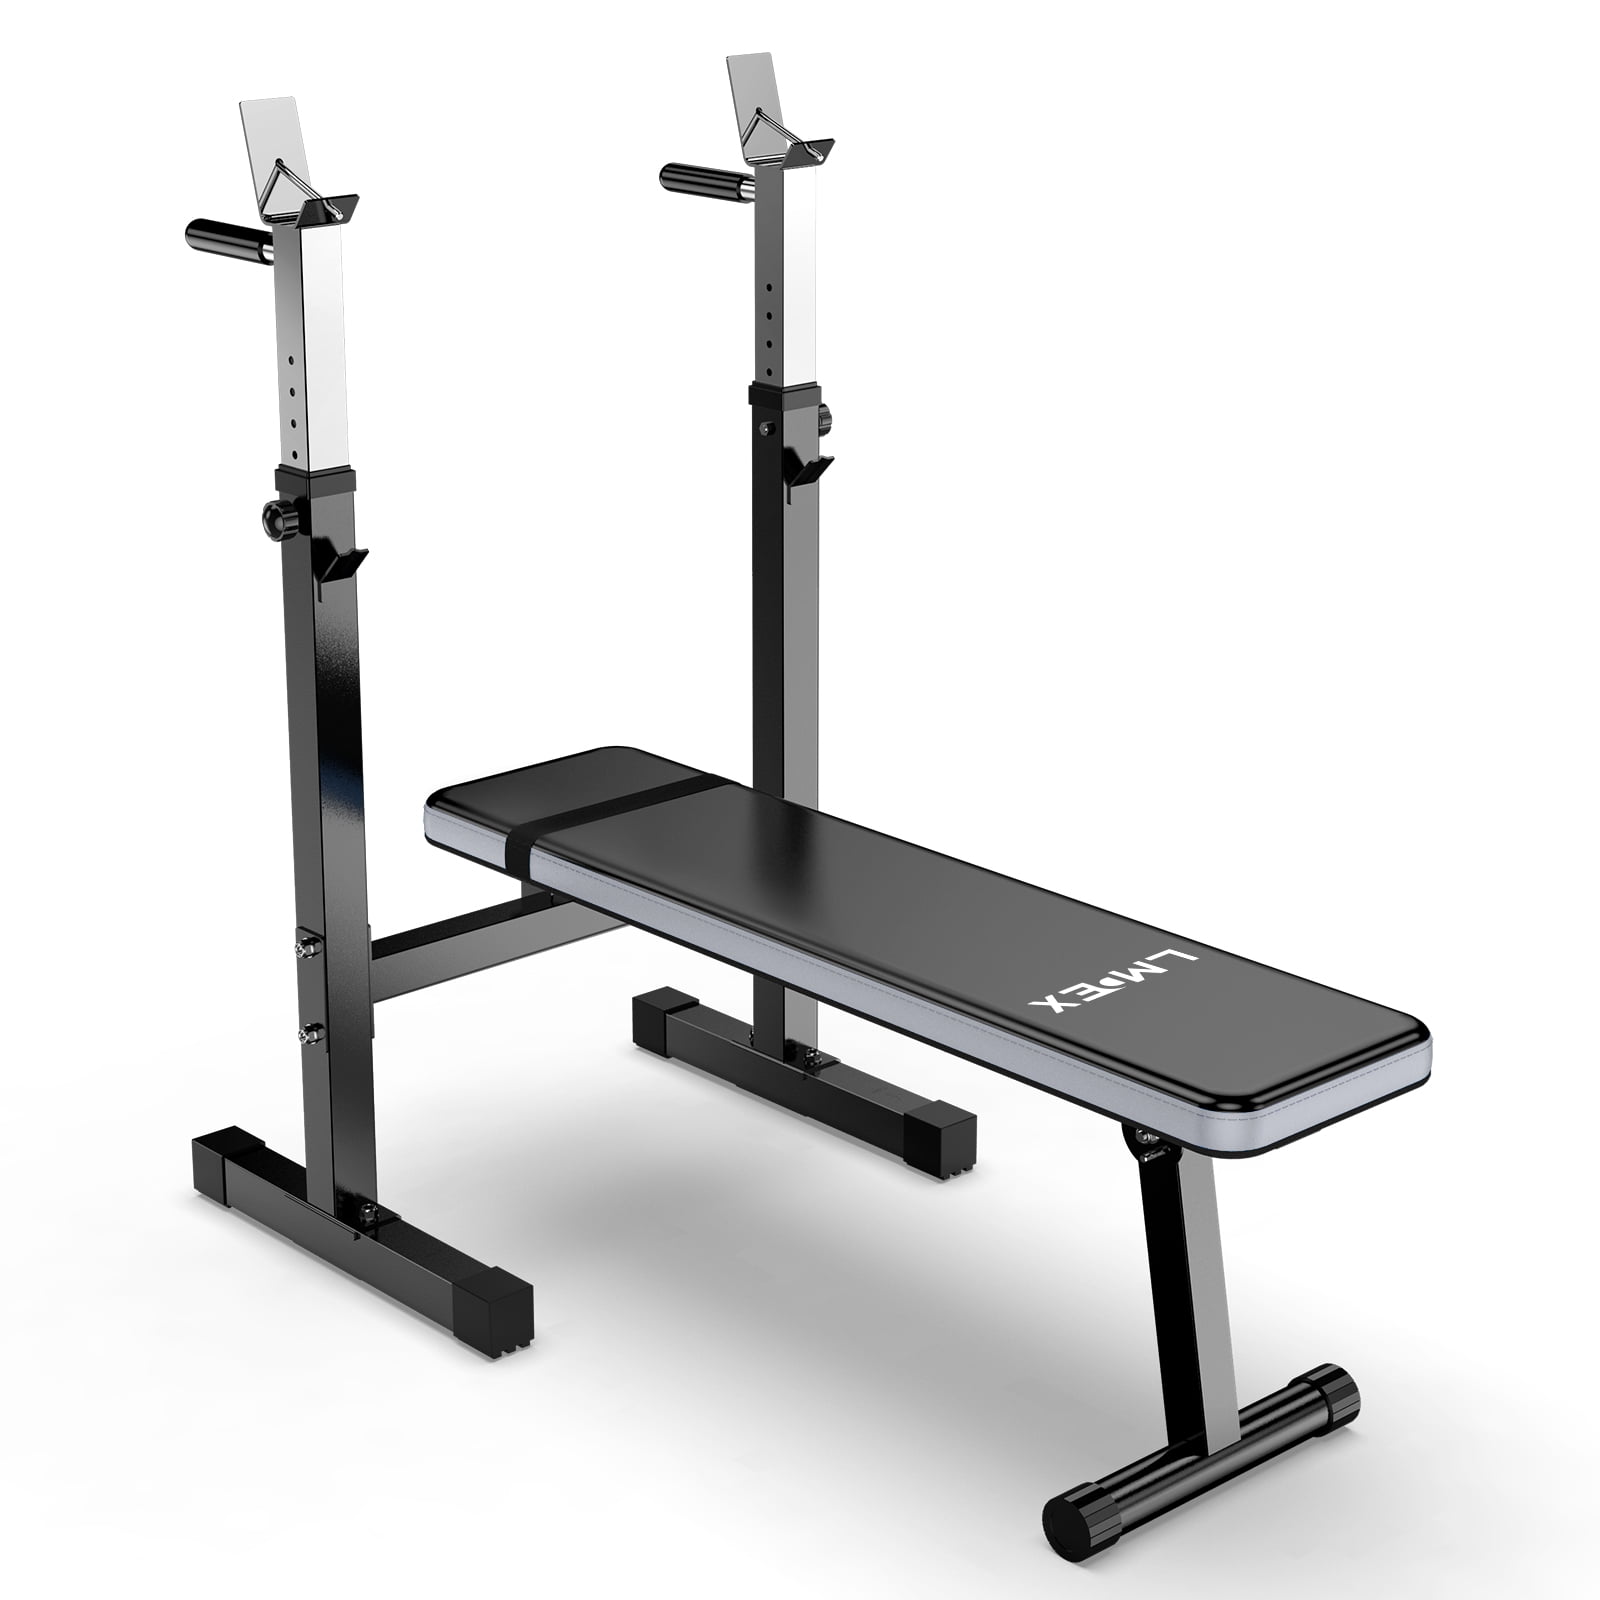 LMDEX Adjustable Weight Bench Incline & Decline Workout Full Capability Body Rack Fitness Barbell Home Gym Folding Strength for